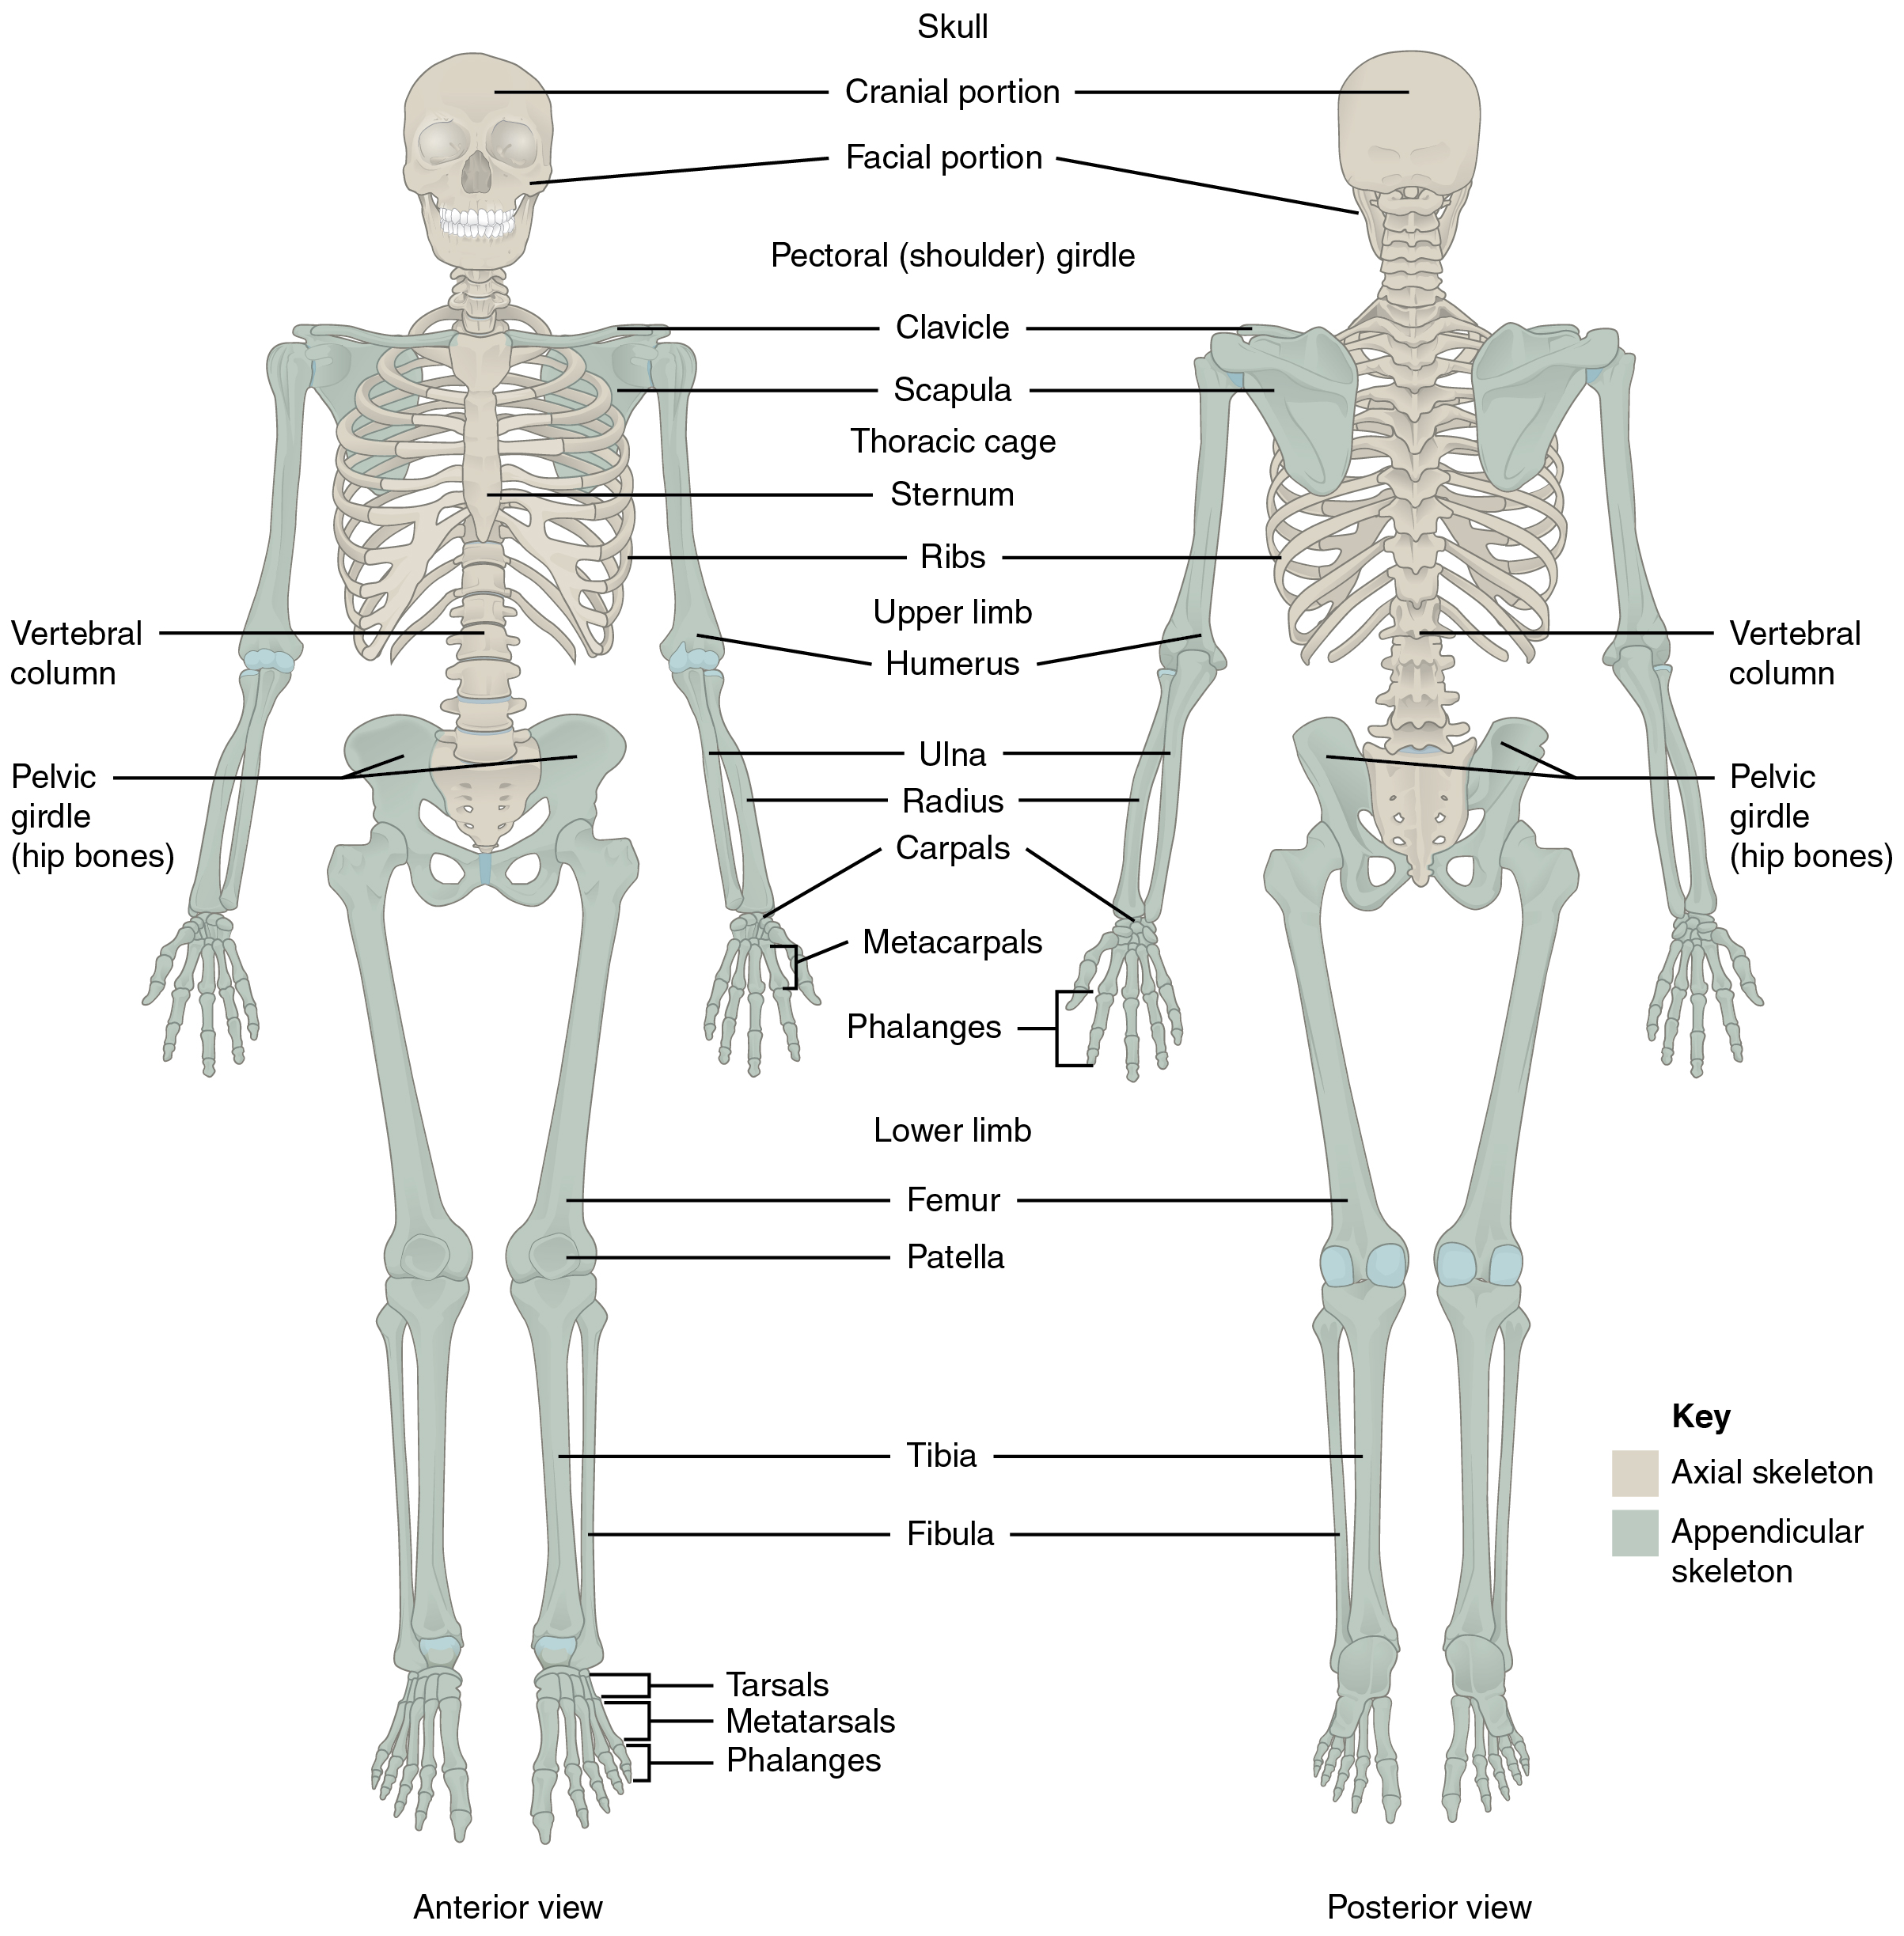 anterior and posterior views of the skeleton. Image description available.